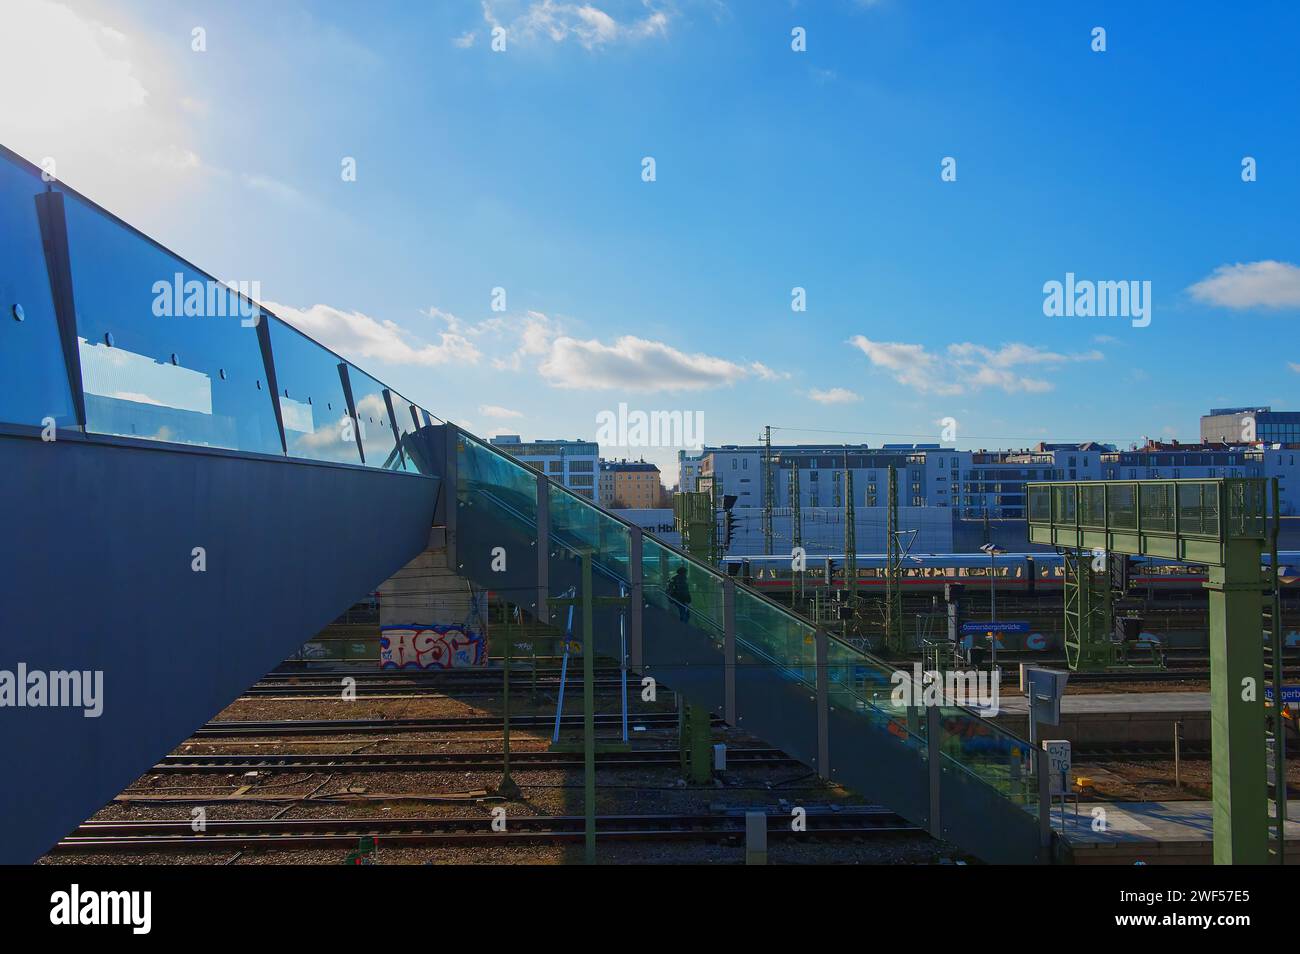 Pedestrian bridge and part view of a rail station under the blue sky Stock Photo